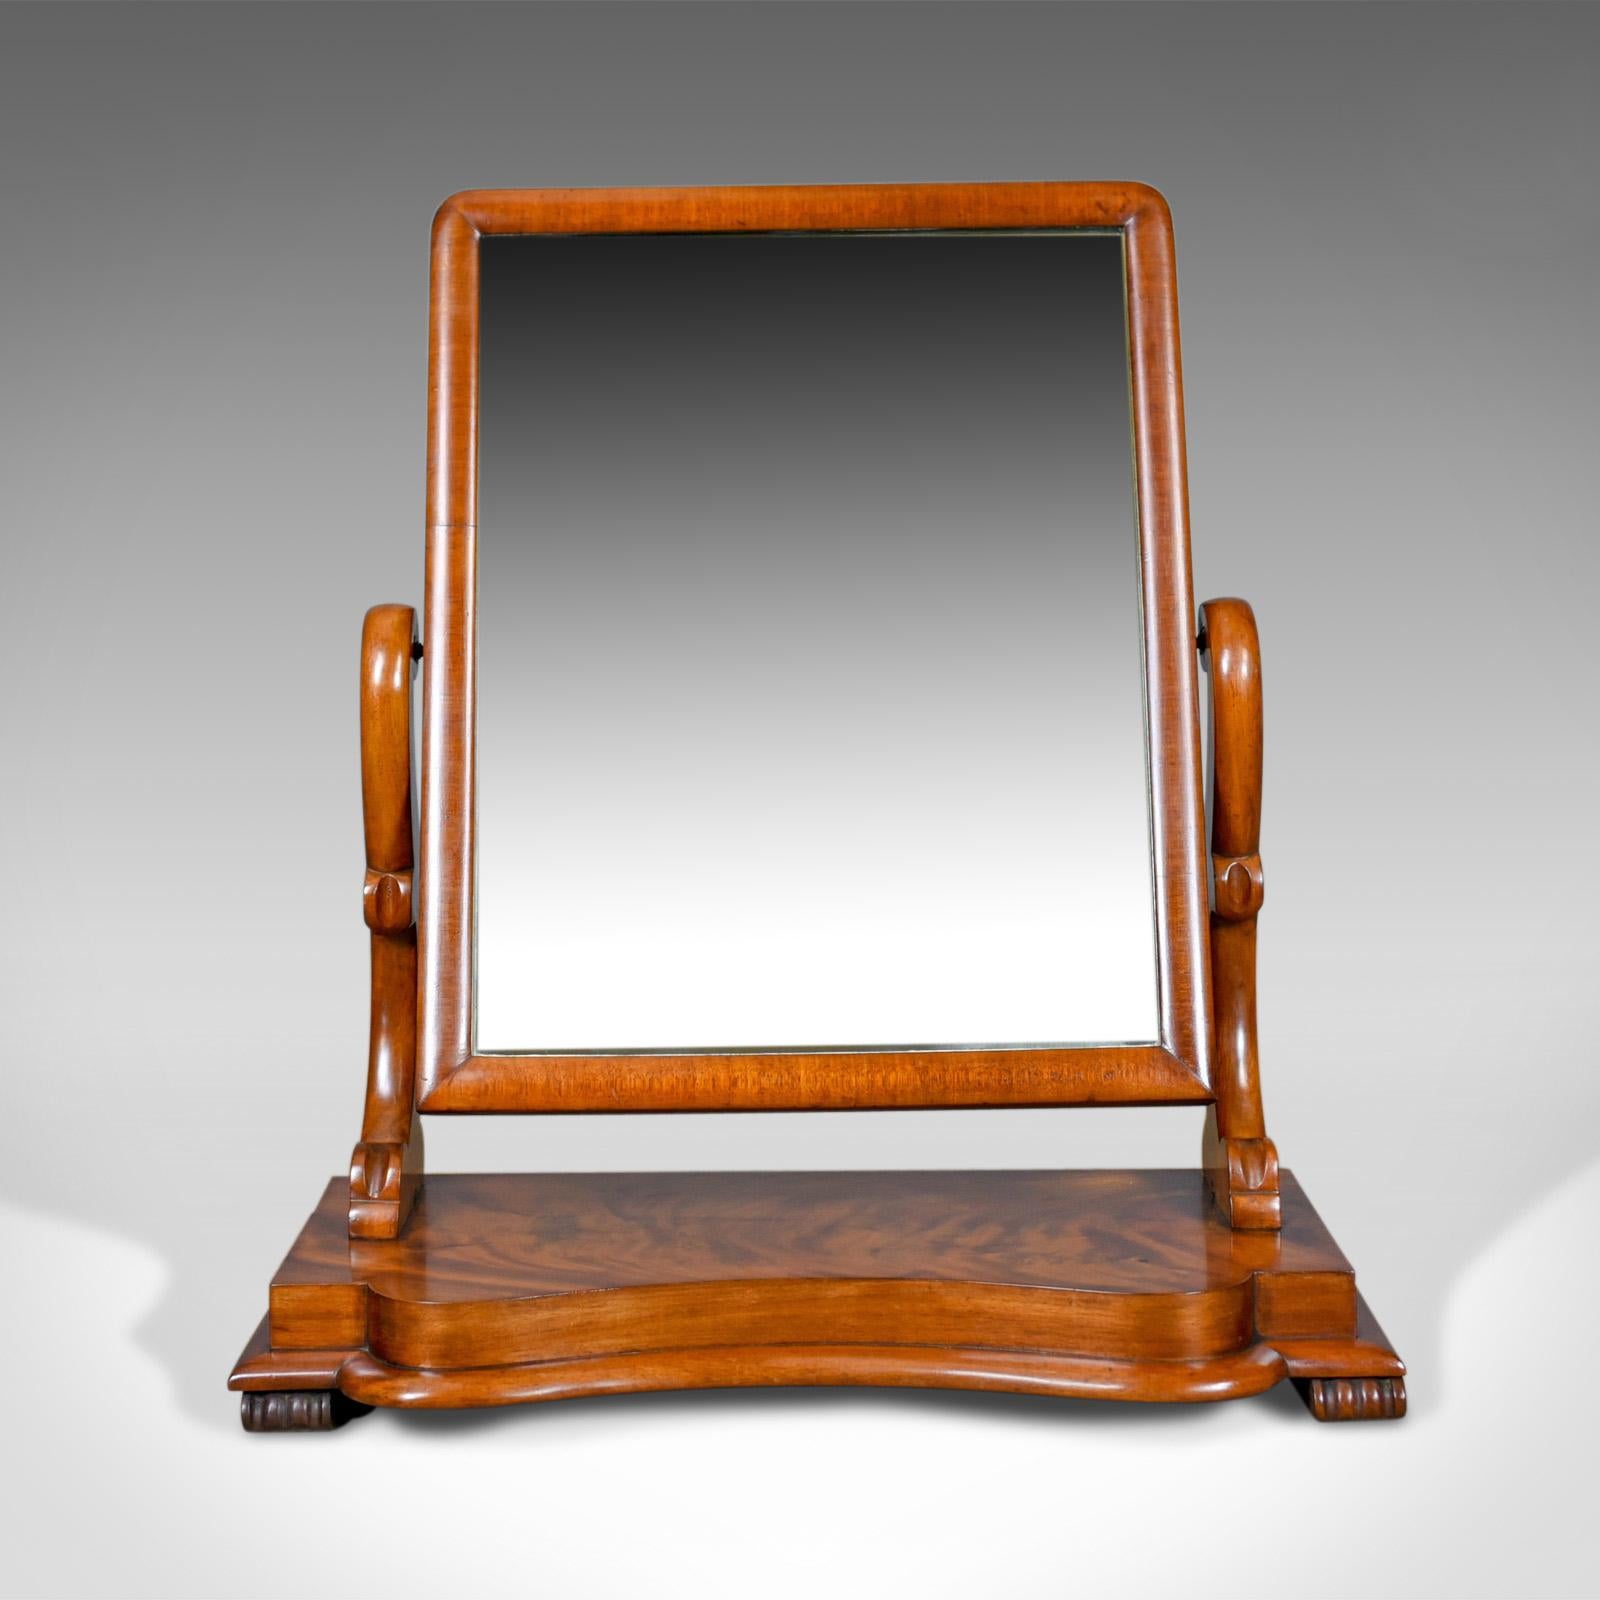 This is an antique platform mirror in flame mahogany. English Victorian vanity, dating to the 19th century, circa 1870.

A large adjustable platform, vanity mirror
Flame mahogany displaying grain interest and a desirable aged patina
Good